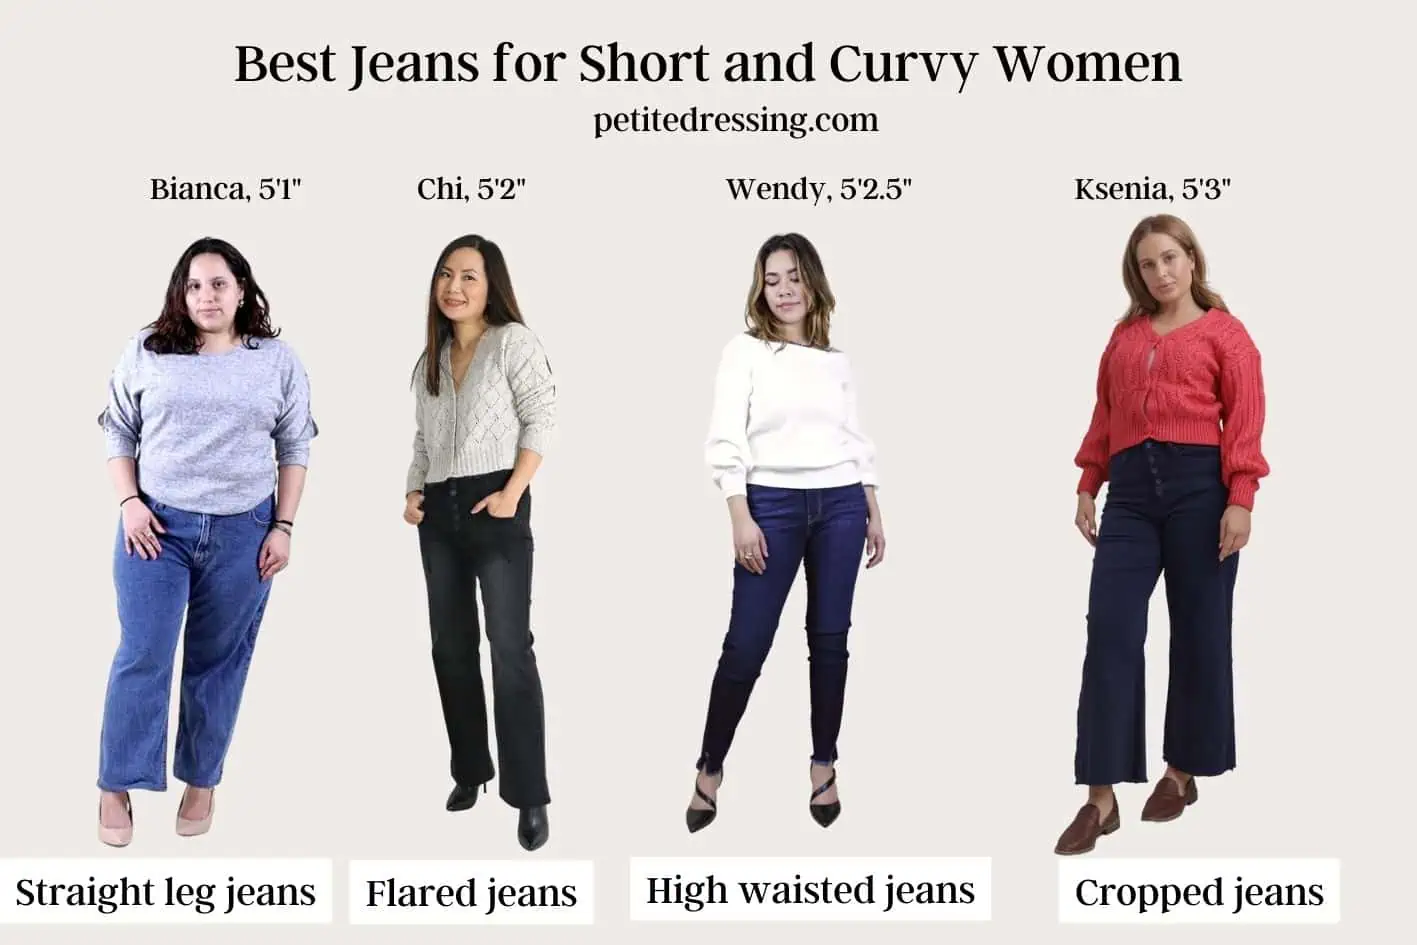 Bootcut Or Skinny Jeans For Petite Or Smaller Women? - THE JEANS BLOG